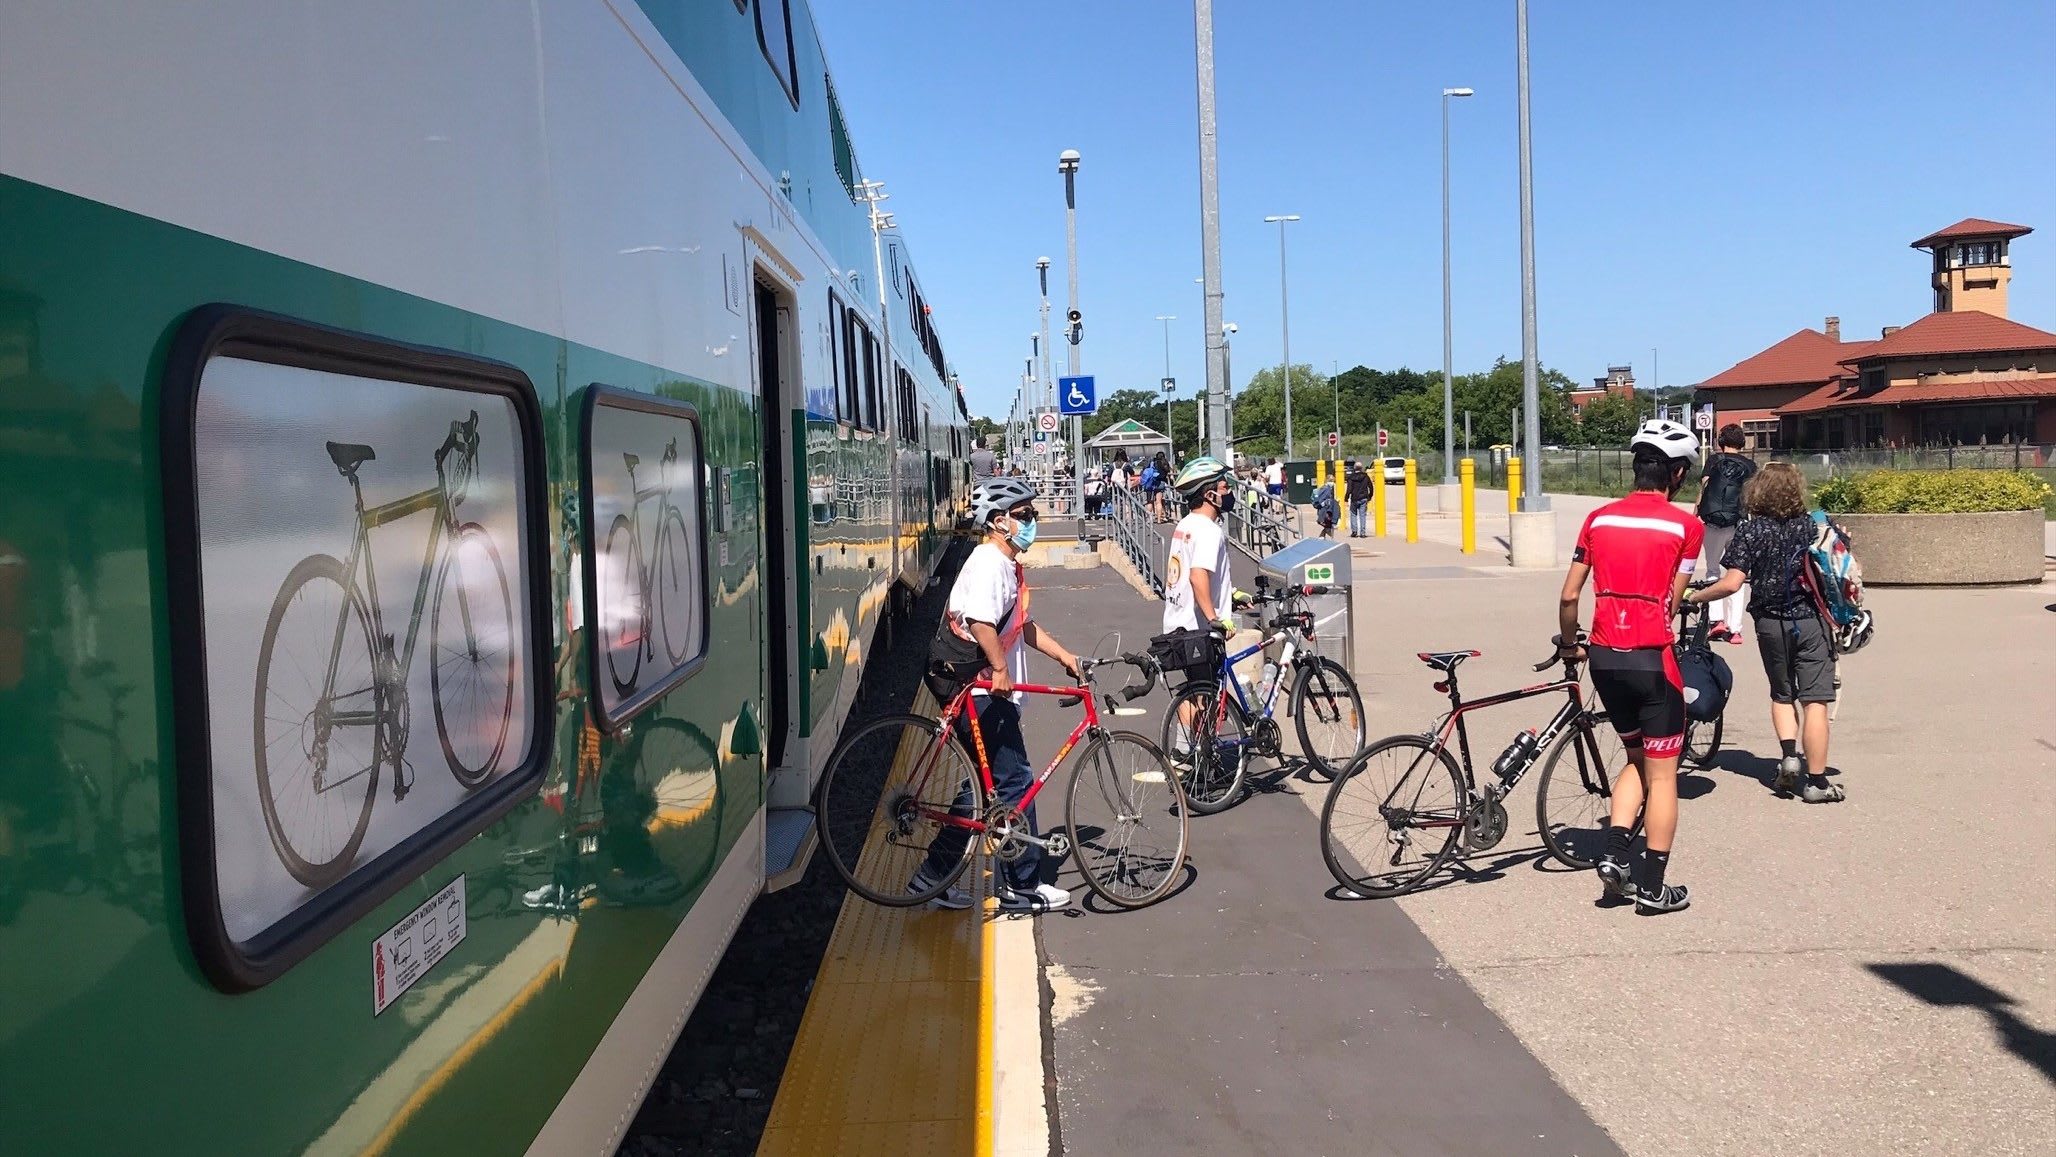 Customers exit a train with bikes